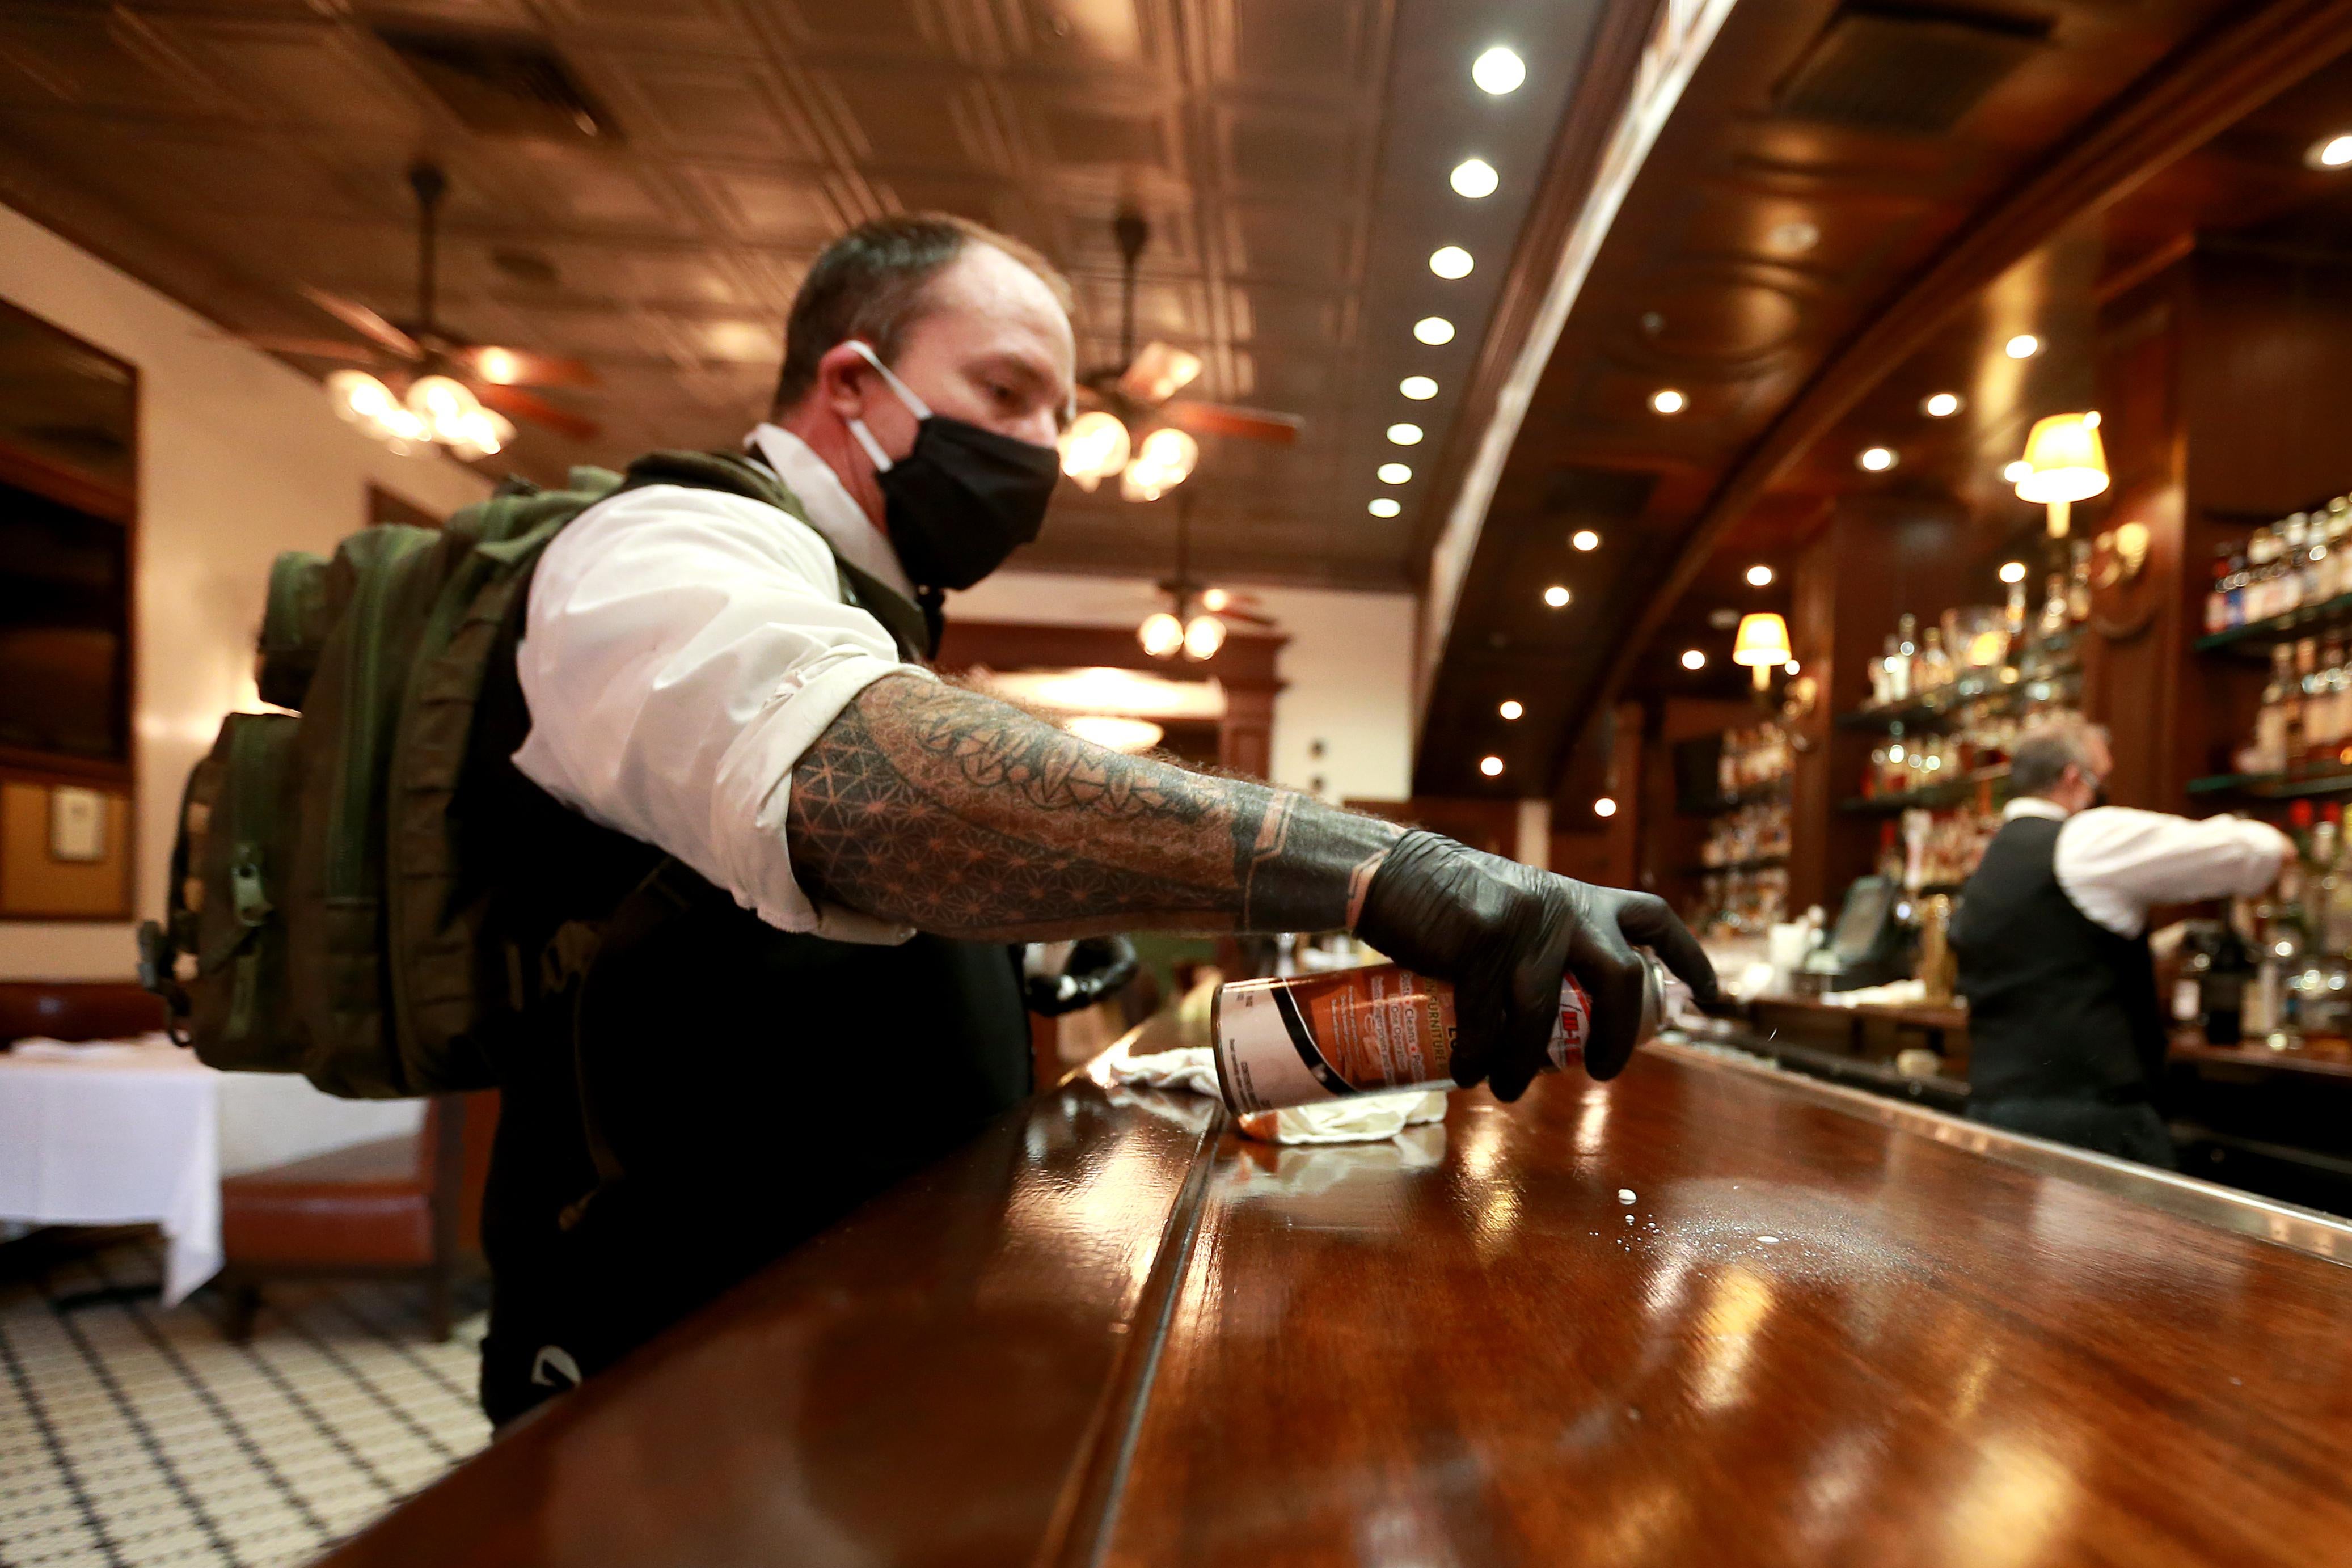 A bartender wearing a black mask and a backpack cleans the bar with disinfectant spray, while a bartender in the back mixes a drink.